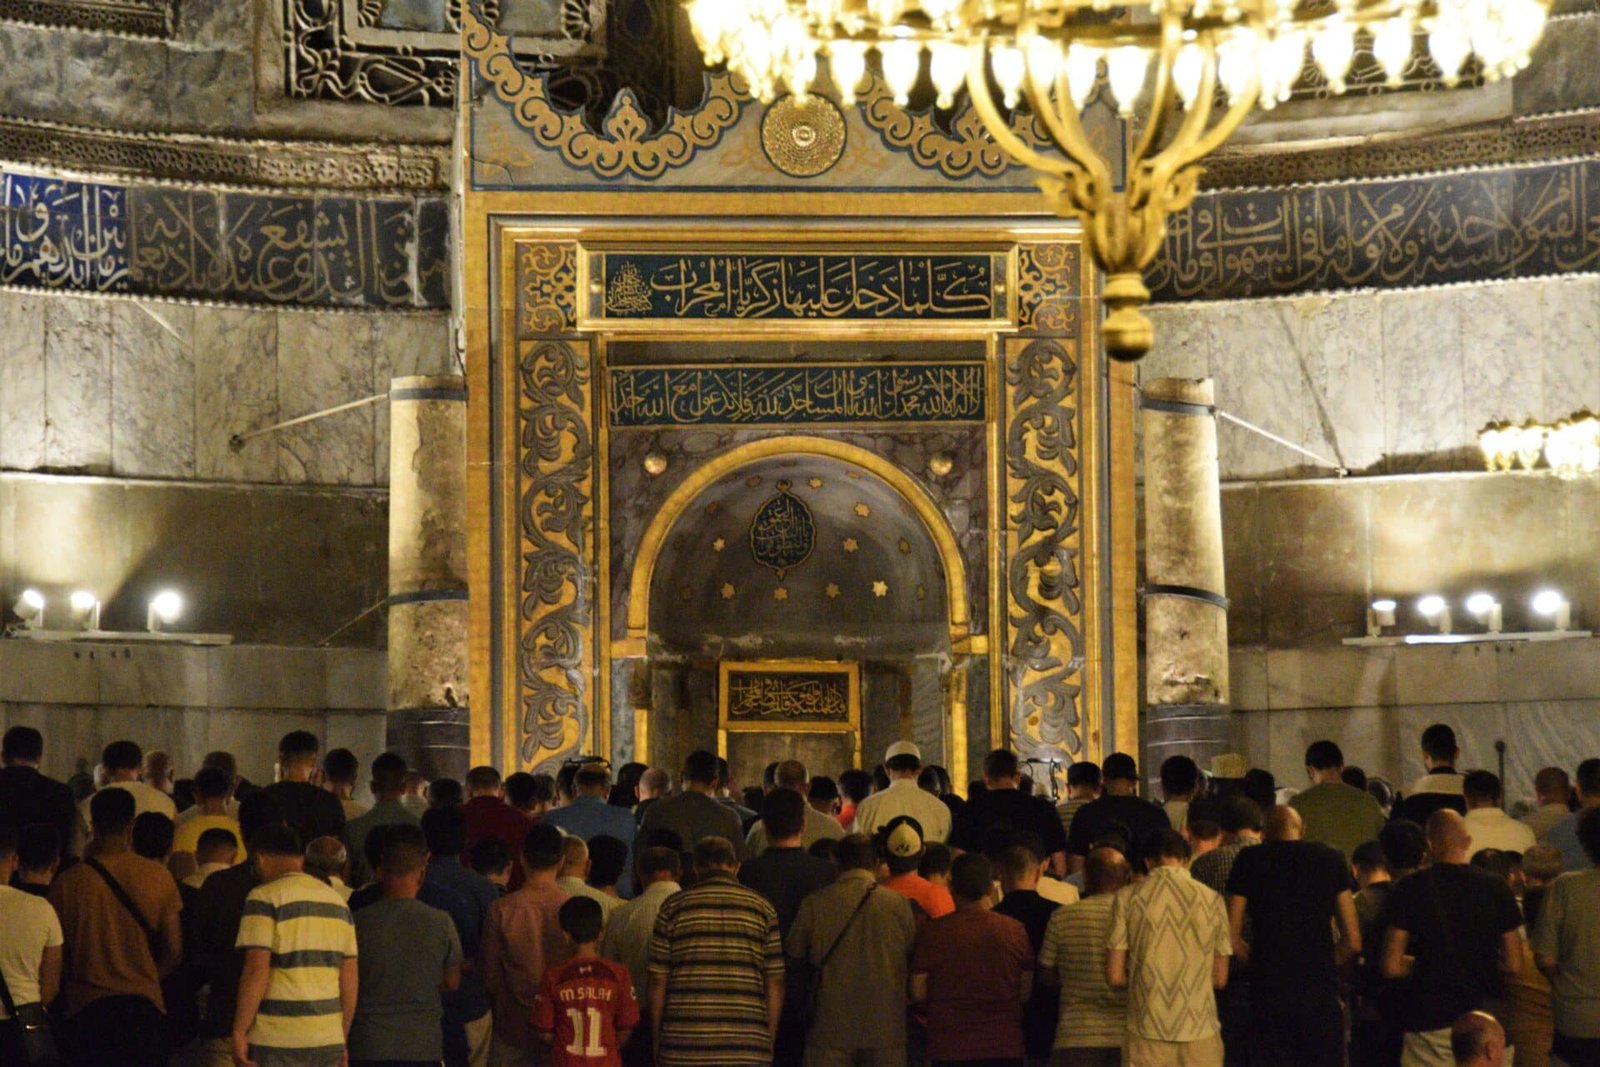 muslims gather in front of the mihrab for prayer in the Hagia Sophia